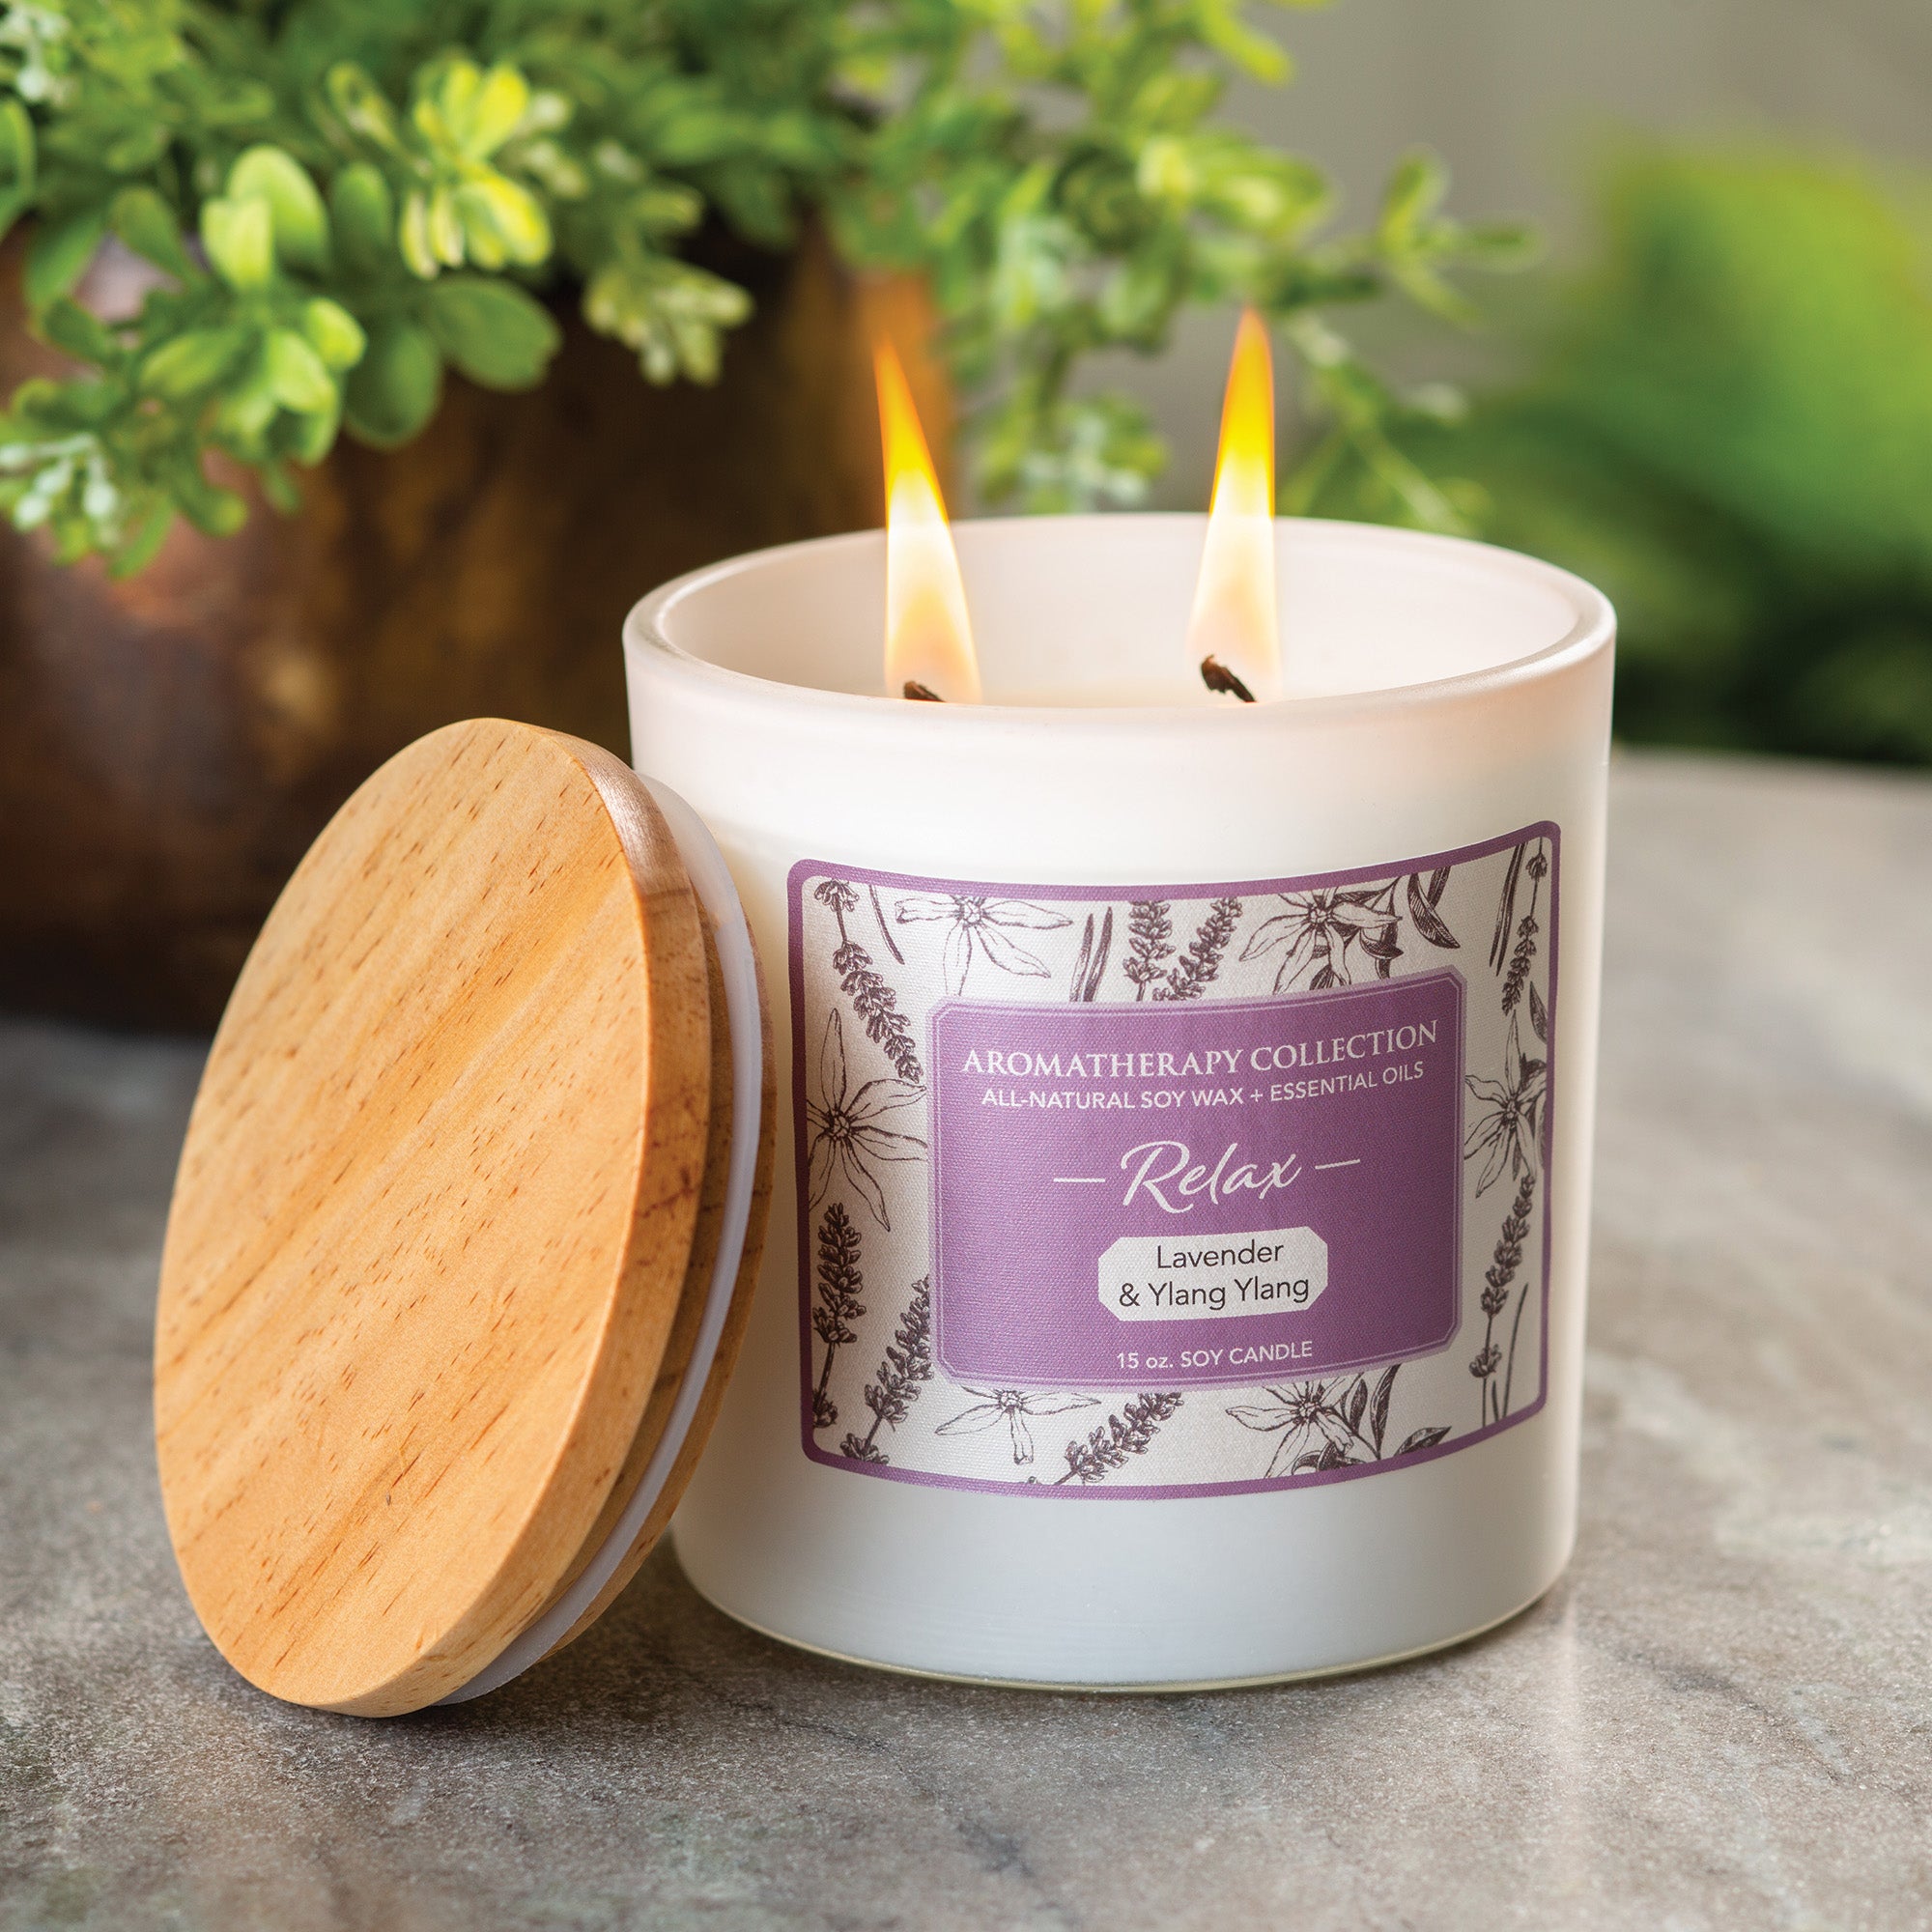 Relax- Lavender & Ylang Ylang Soy Aromatherapy Candle 15oz